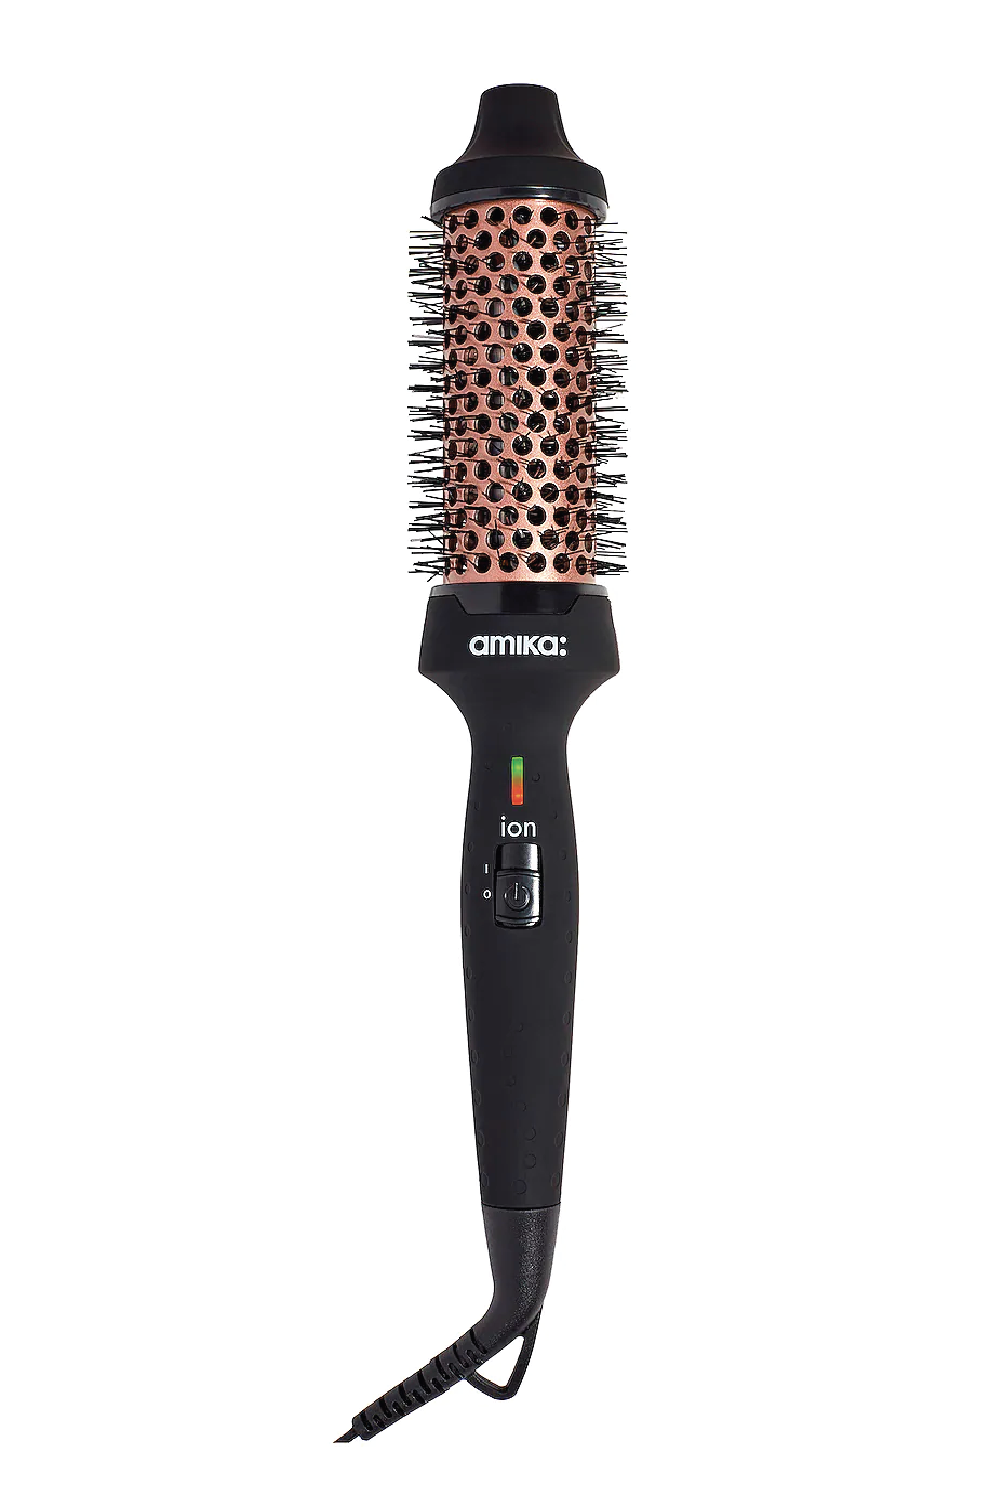 Top 10 Brushes For Blow Drying At Home  Hair Dryer Brush